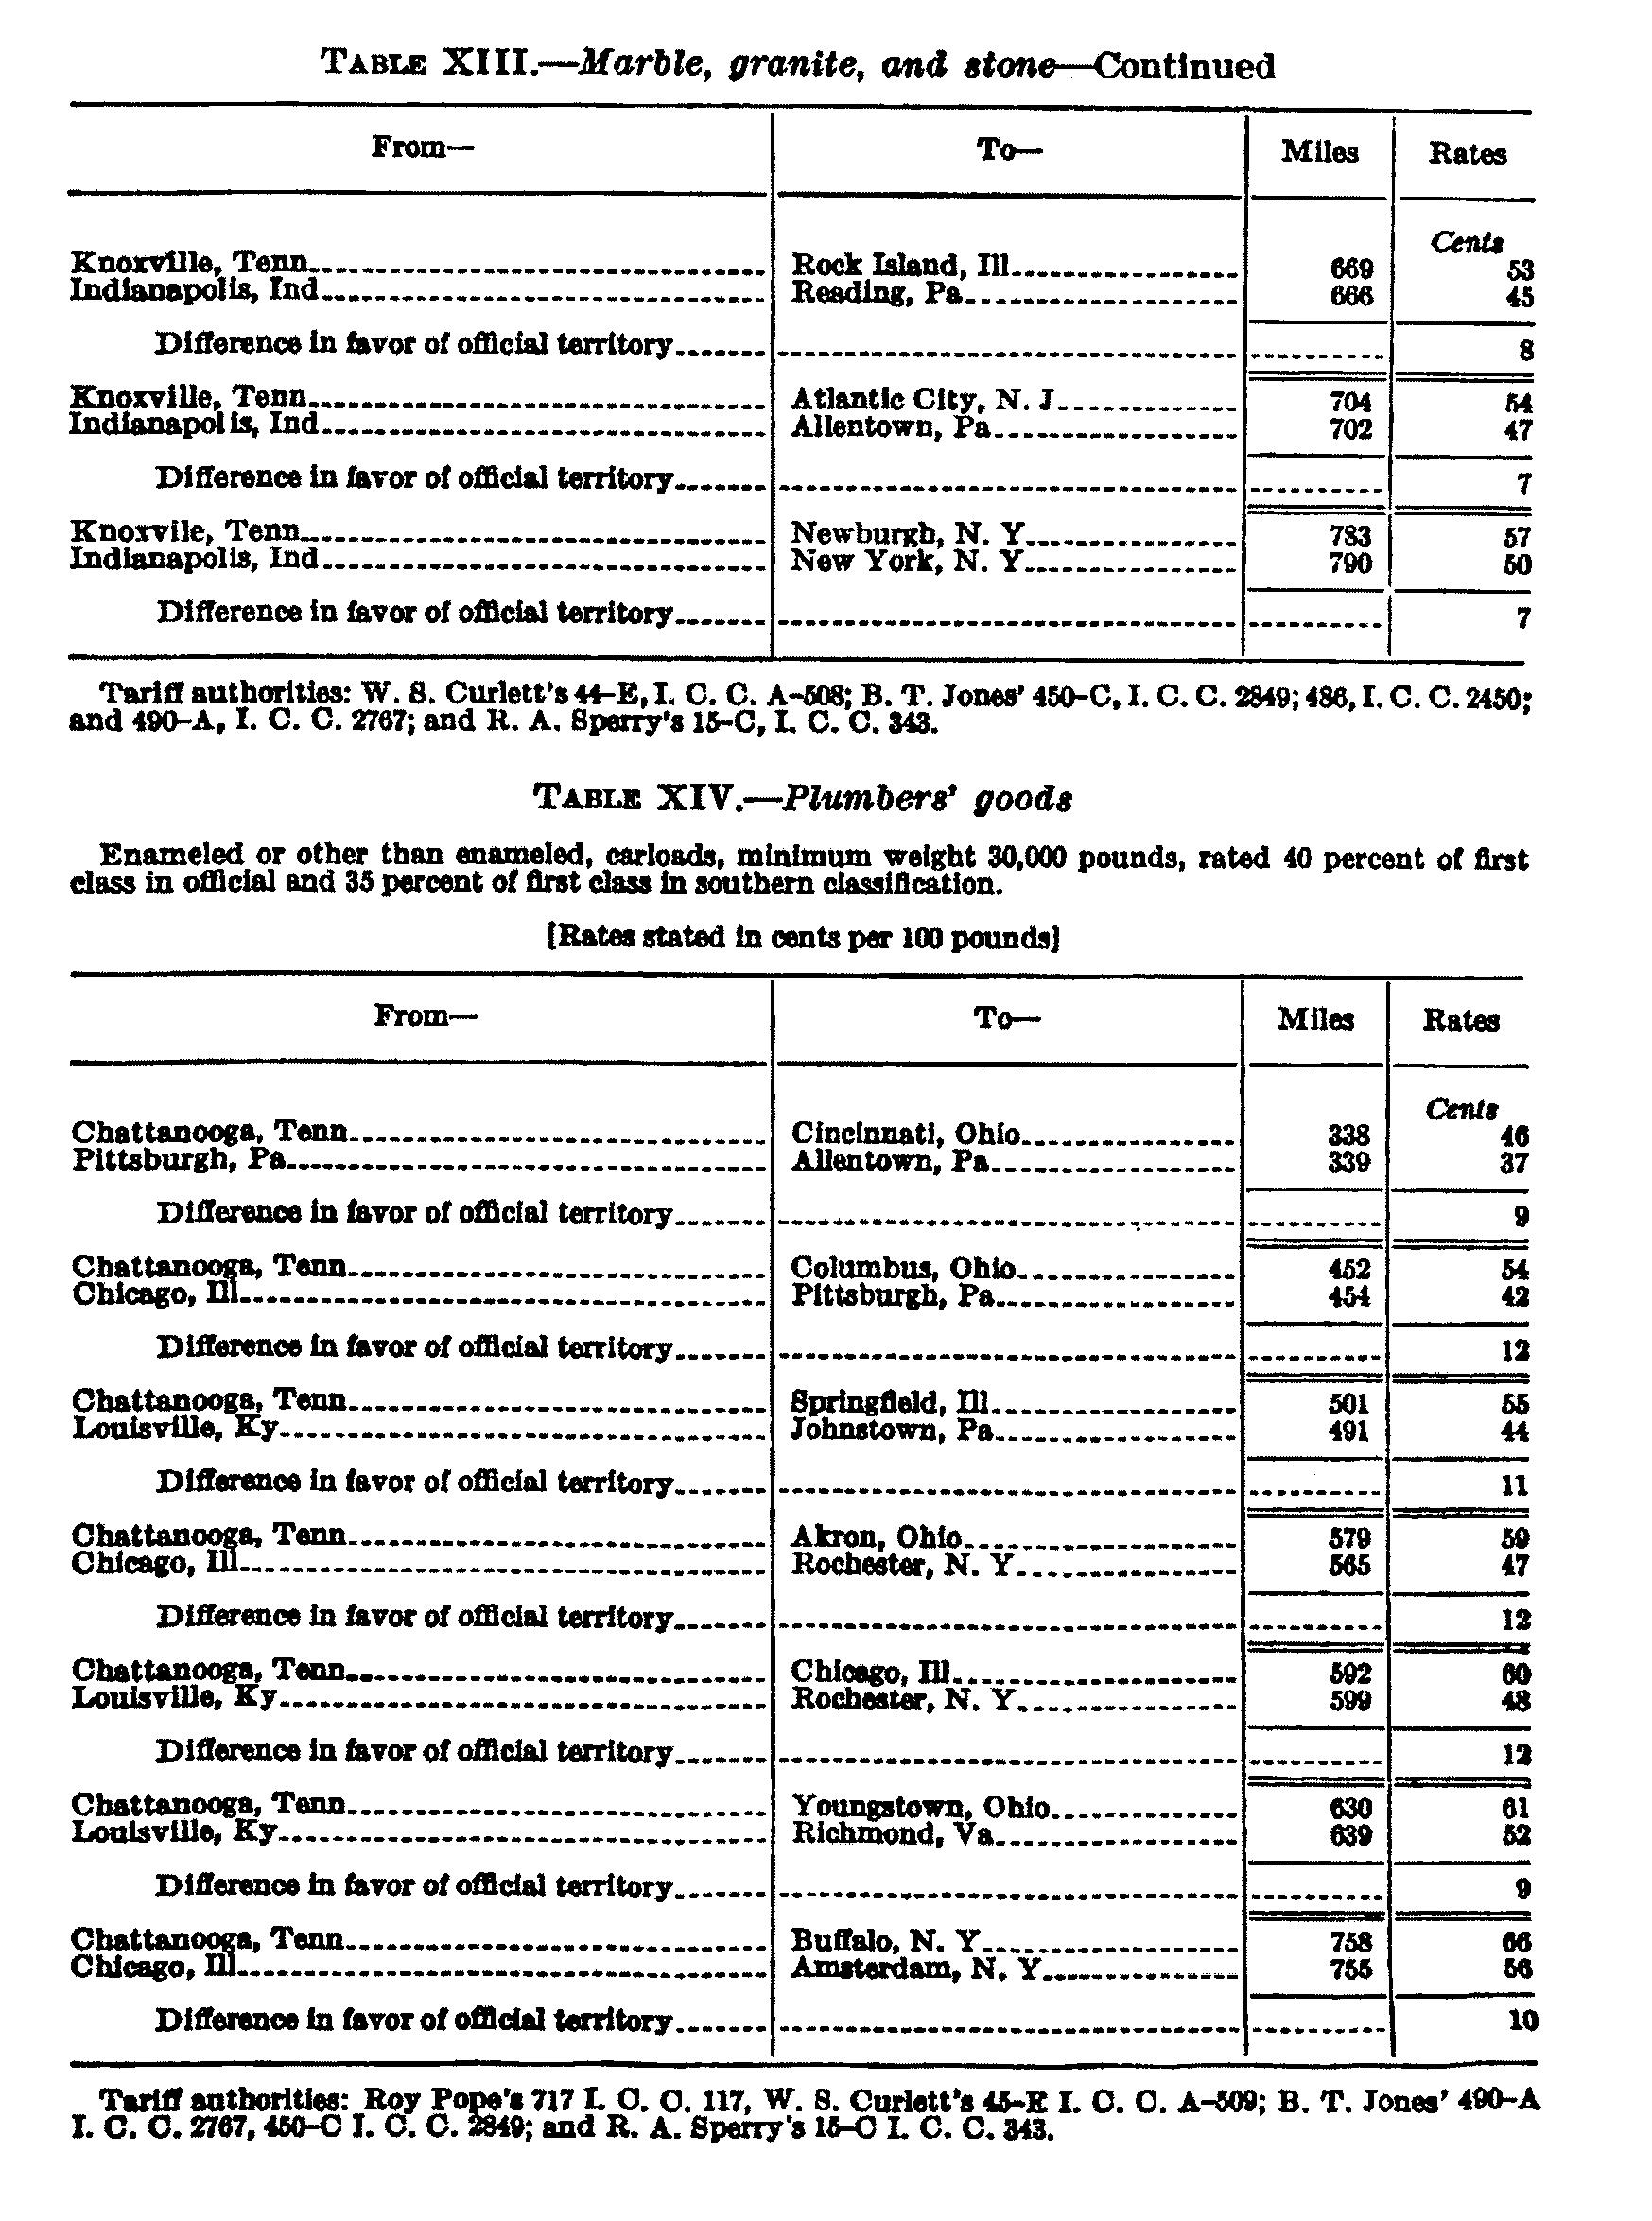 Page 1047 Tables XIII and XIV